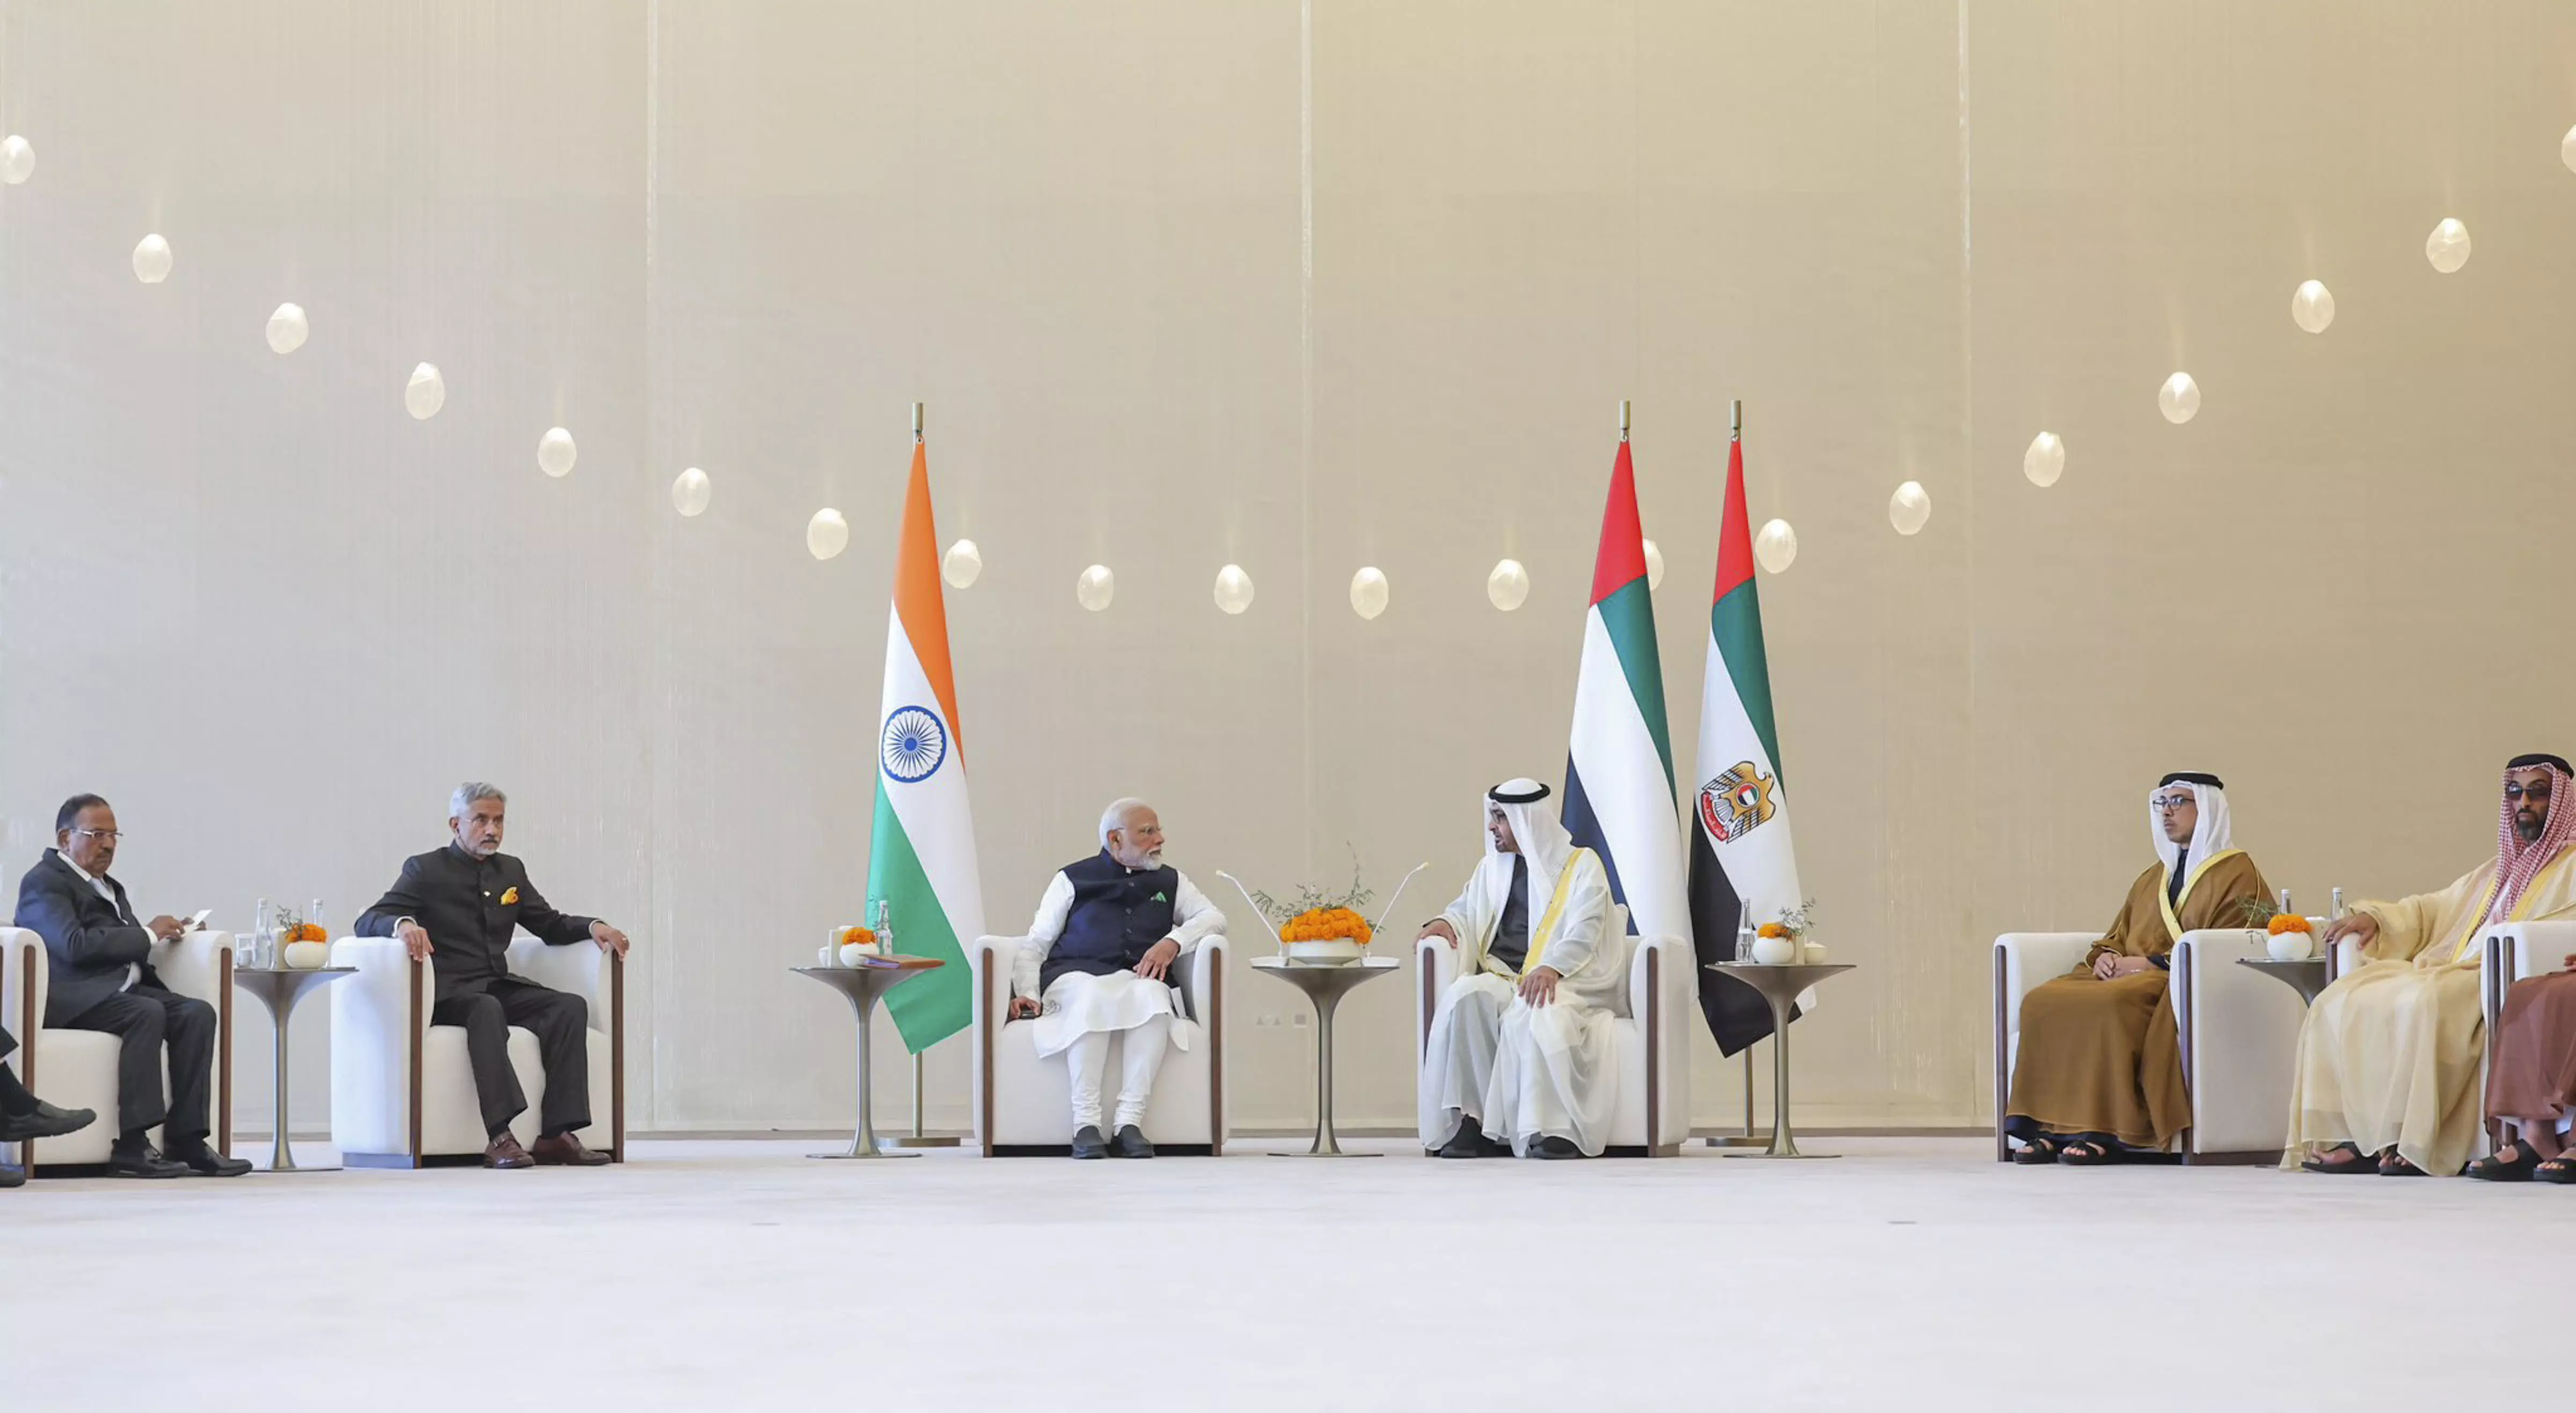 India Signs Eight Agreements with UAE During PM Modi’s Visit